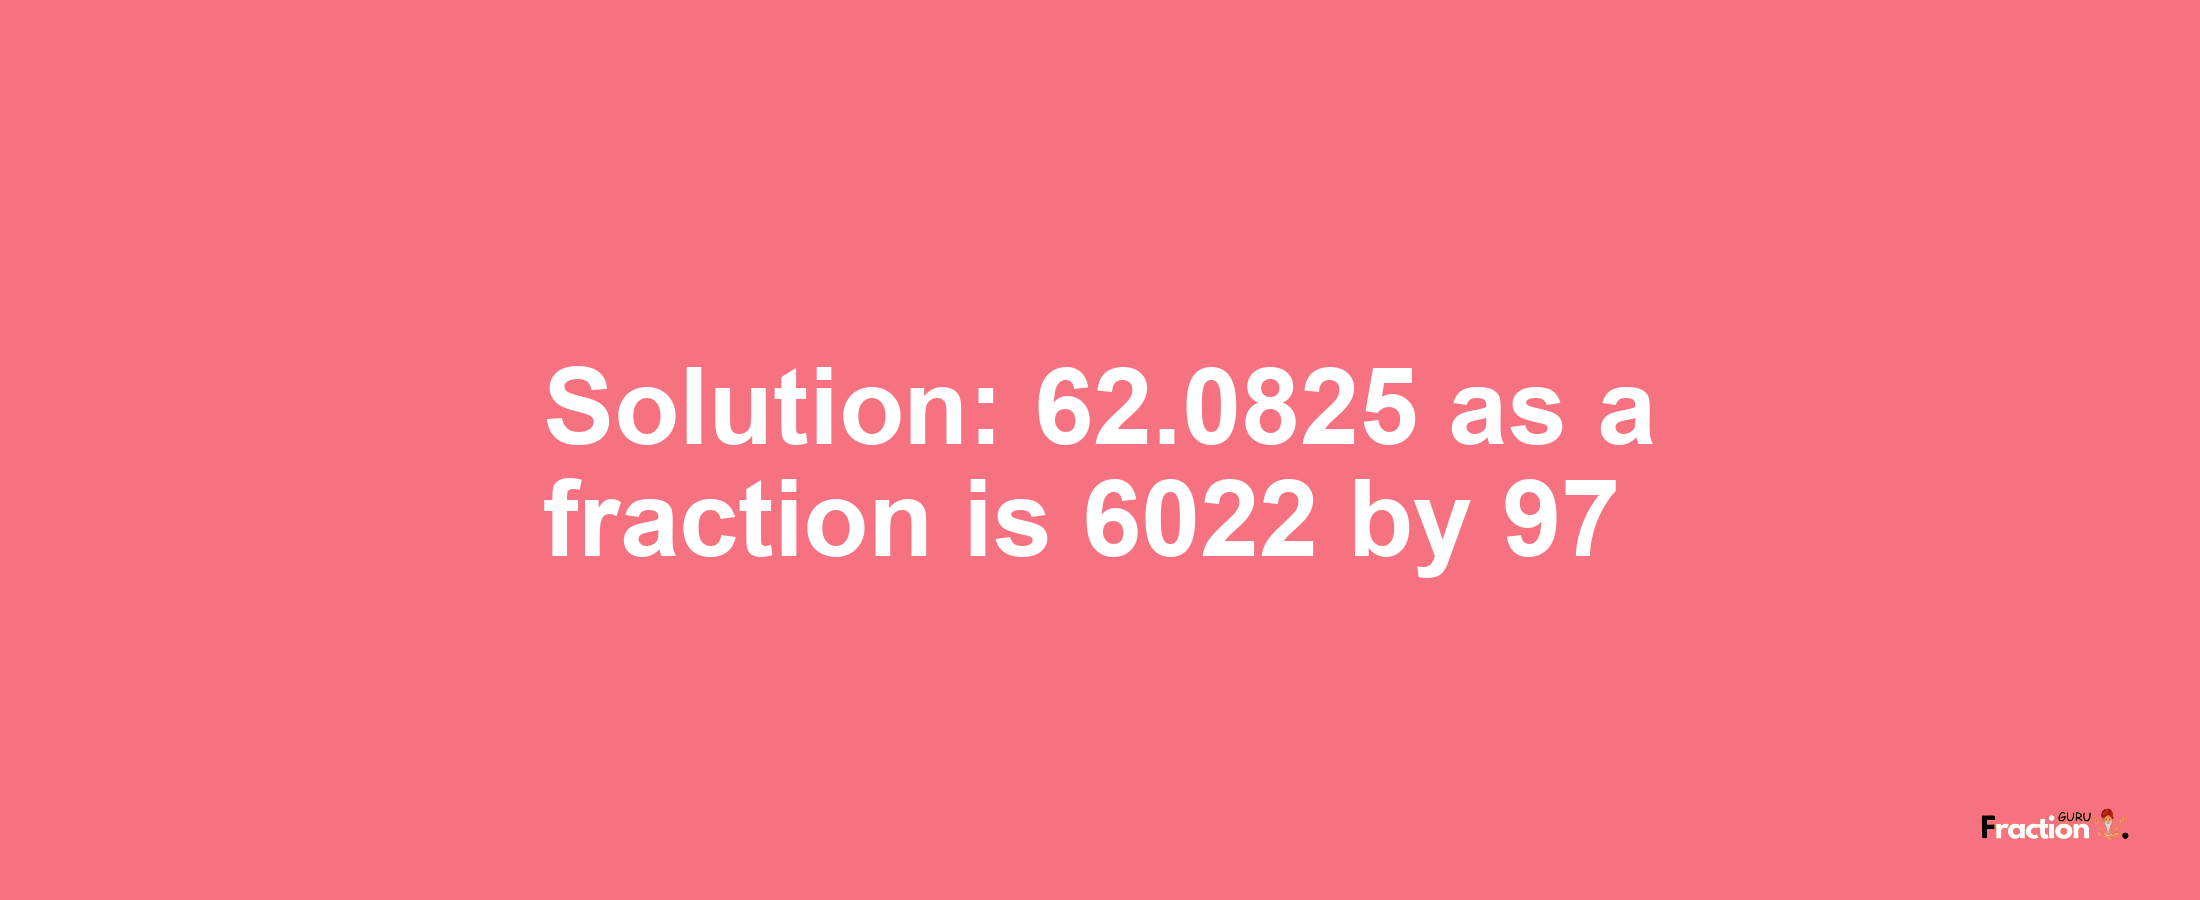 Solution:62.0825 as a fraction is 6022/97